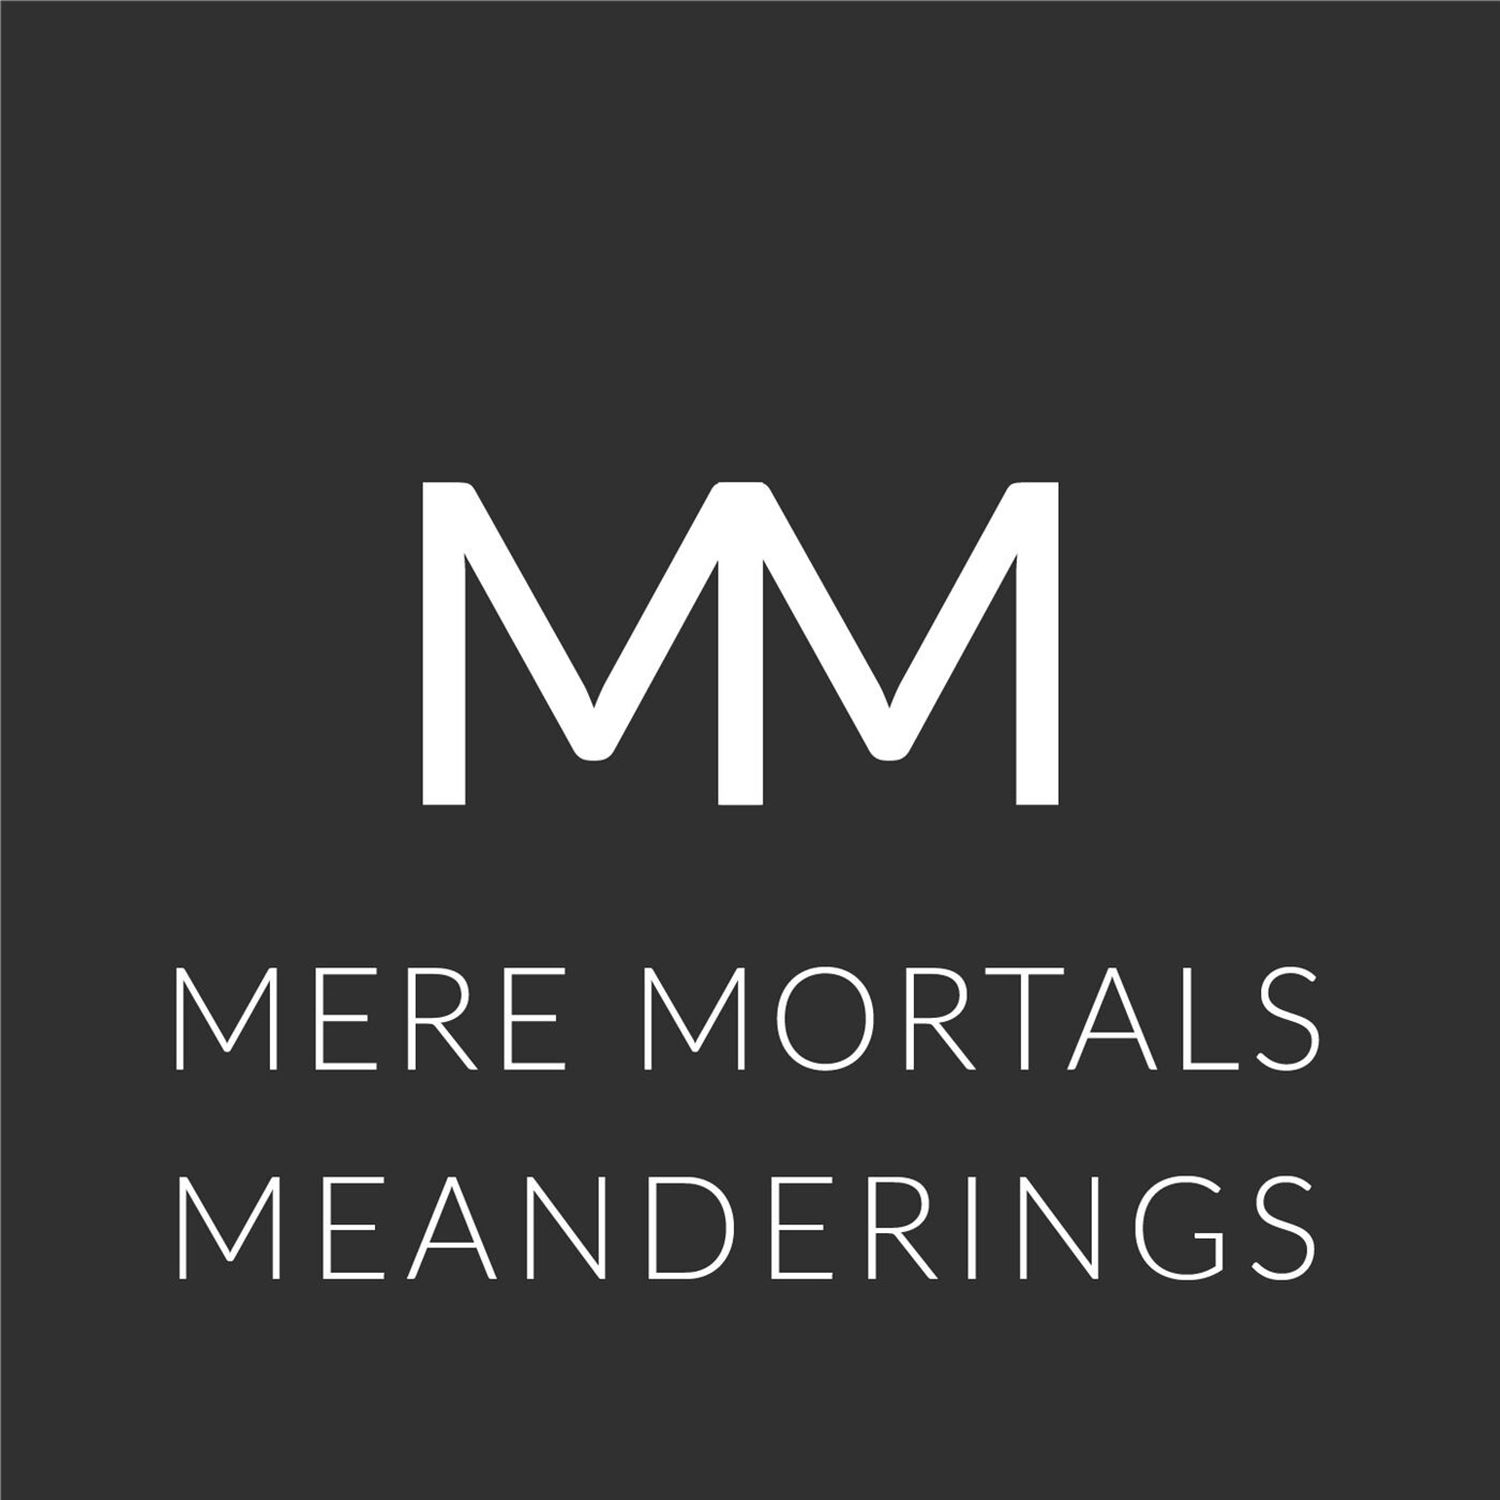 Muscle-Bound Goons & Hairless Toads (Mere Mortals Episode #82 - Meanderings)